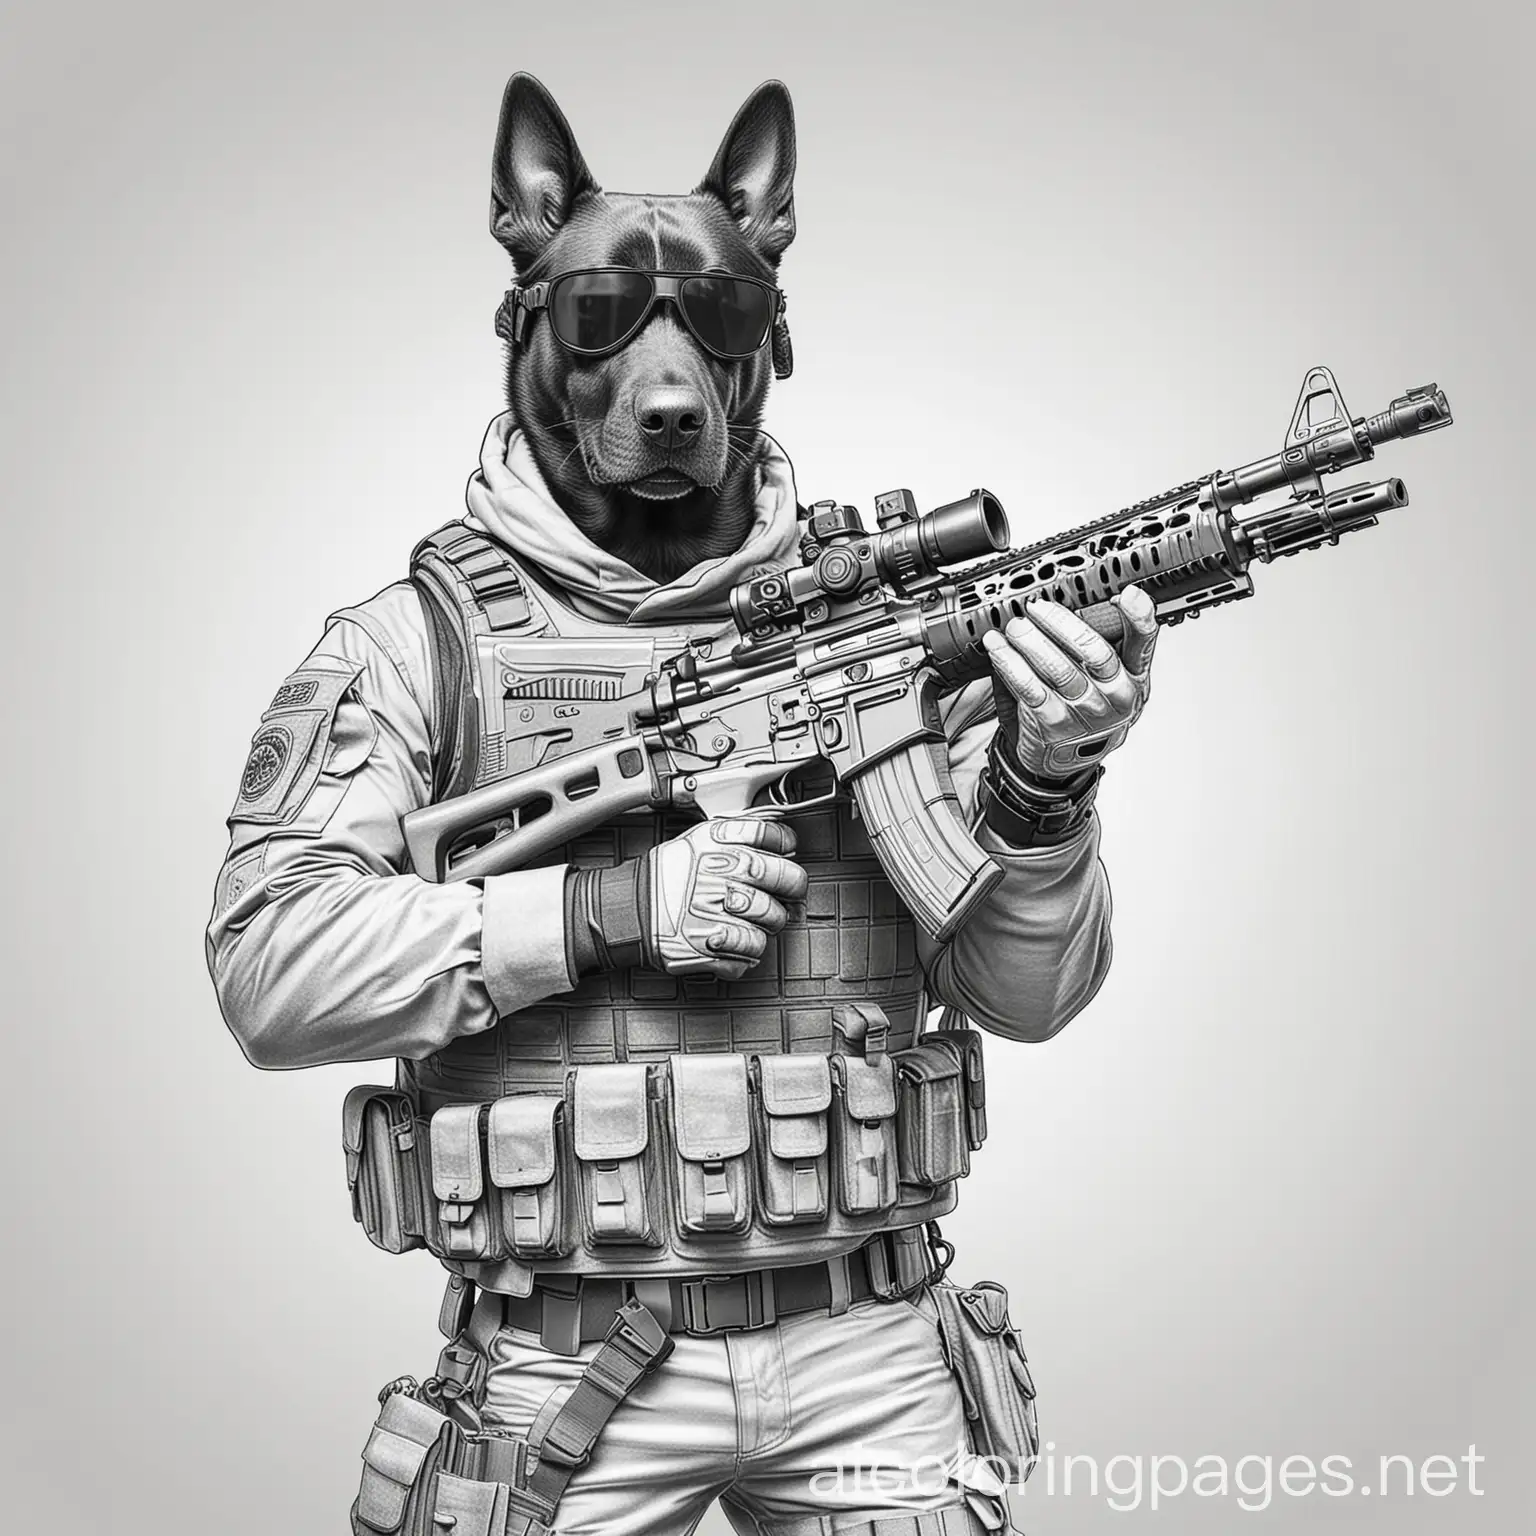 swat dog hold a big gun, Coloring Page, black and white, line art, white background, Simplicity, Ample White Space. The background of the coloring page is plain white to make it easy for young children to color within the lines. The outlines of all the subjects are easy to distinguish, making it simple for kids to color without too much difficulty